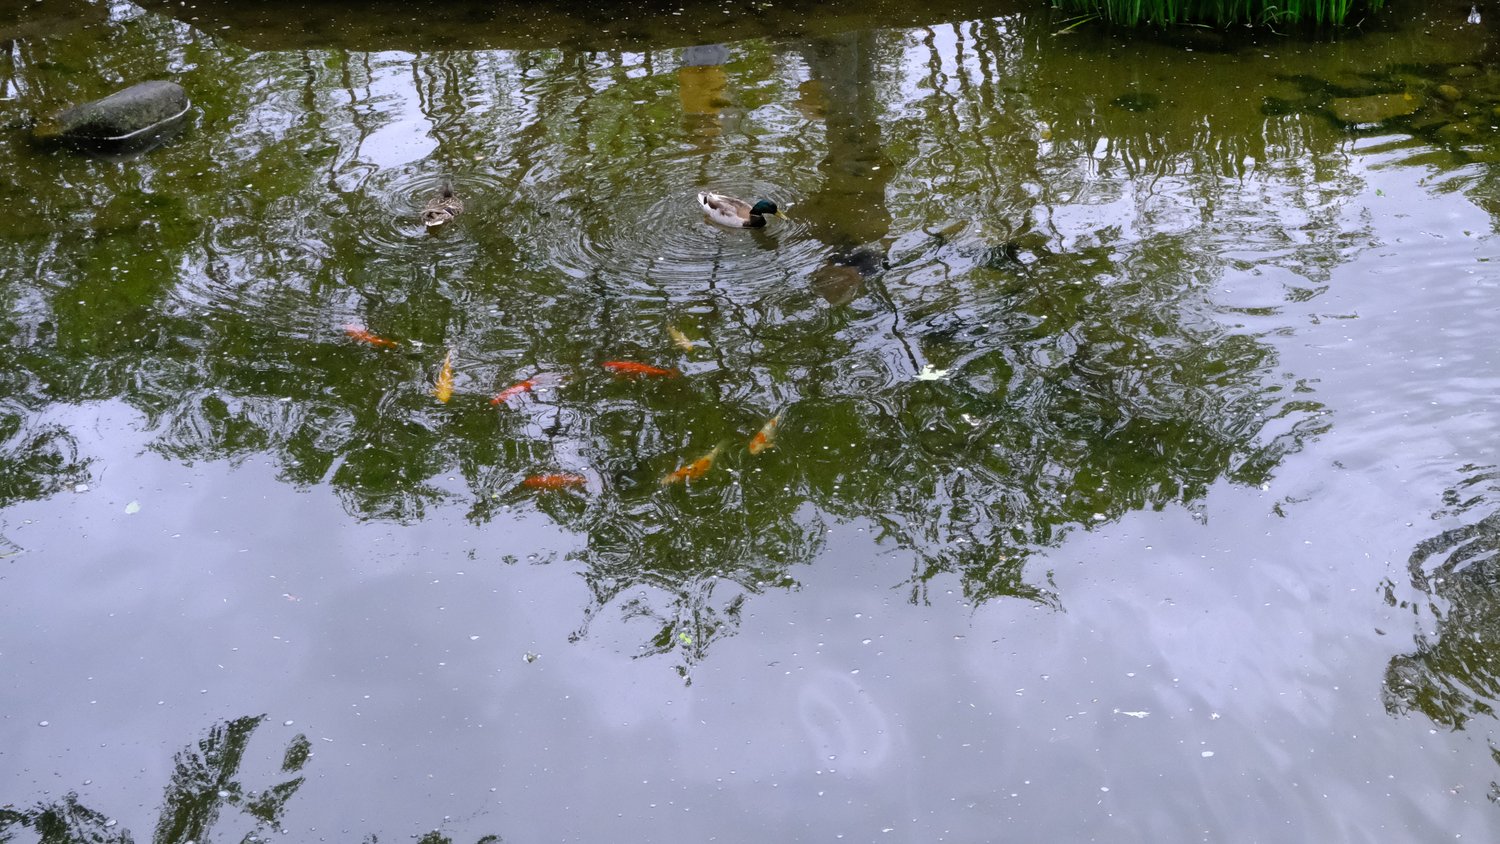 Mallards and koi by the viewing deck.